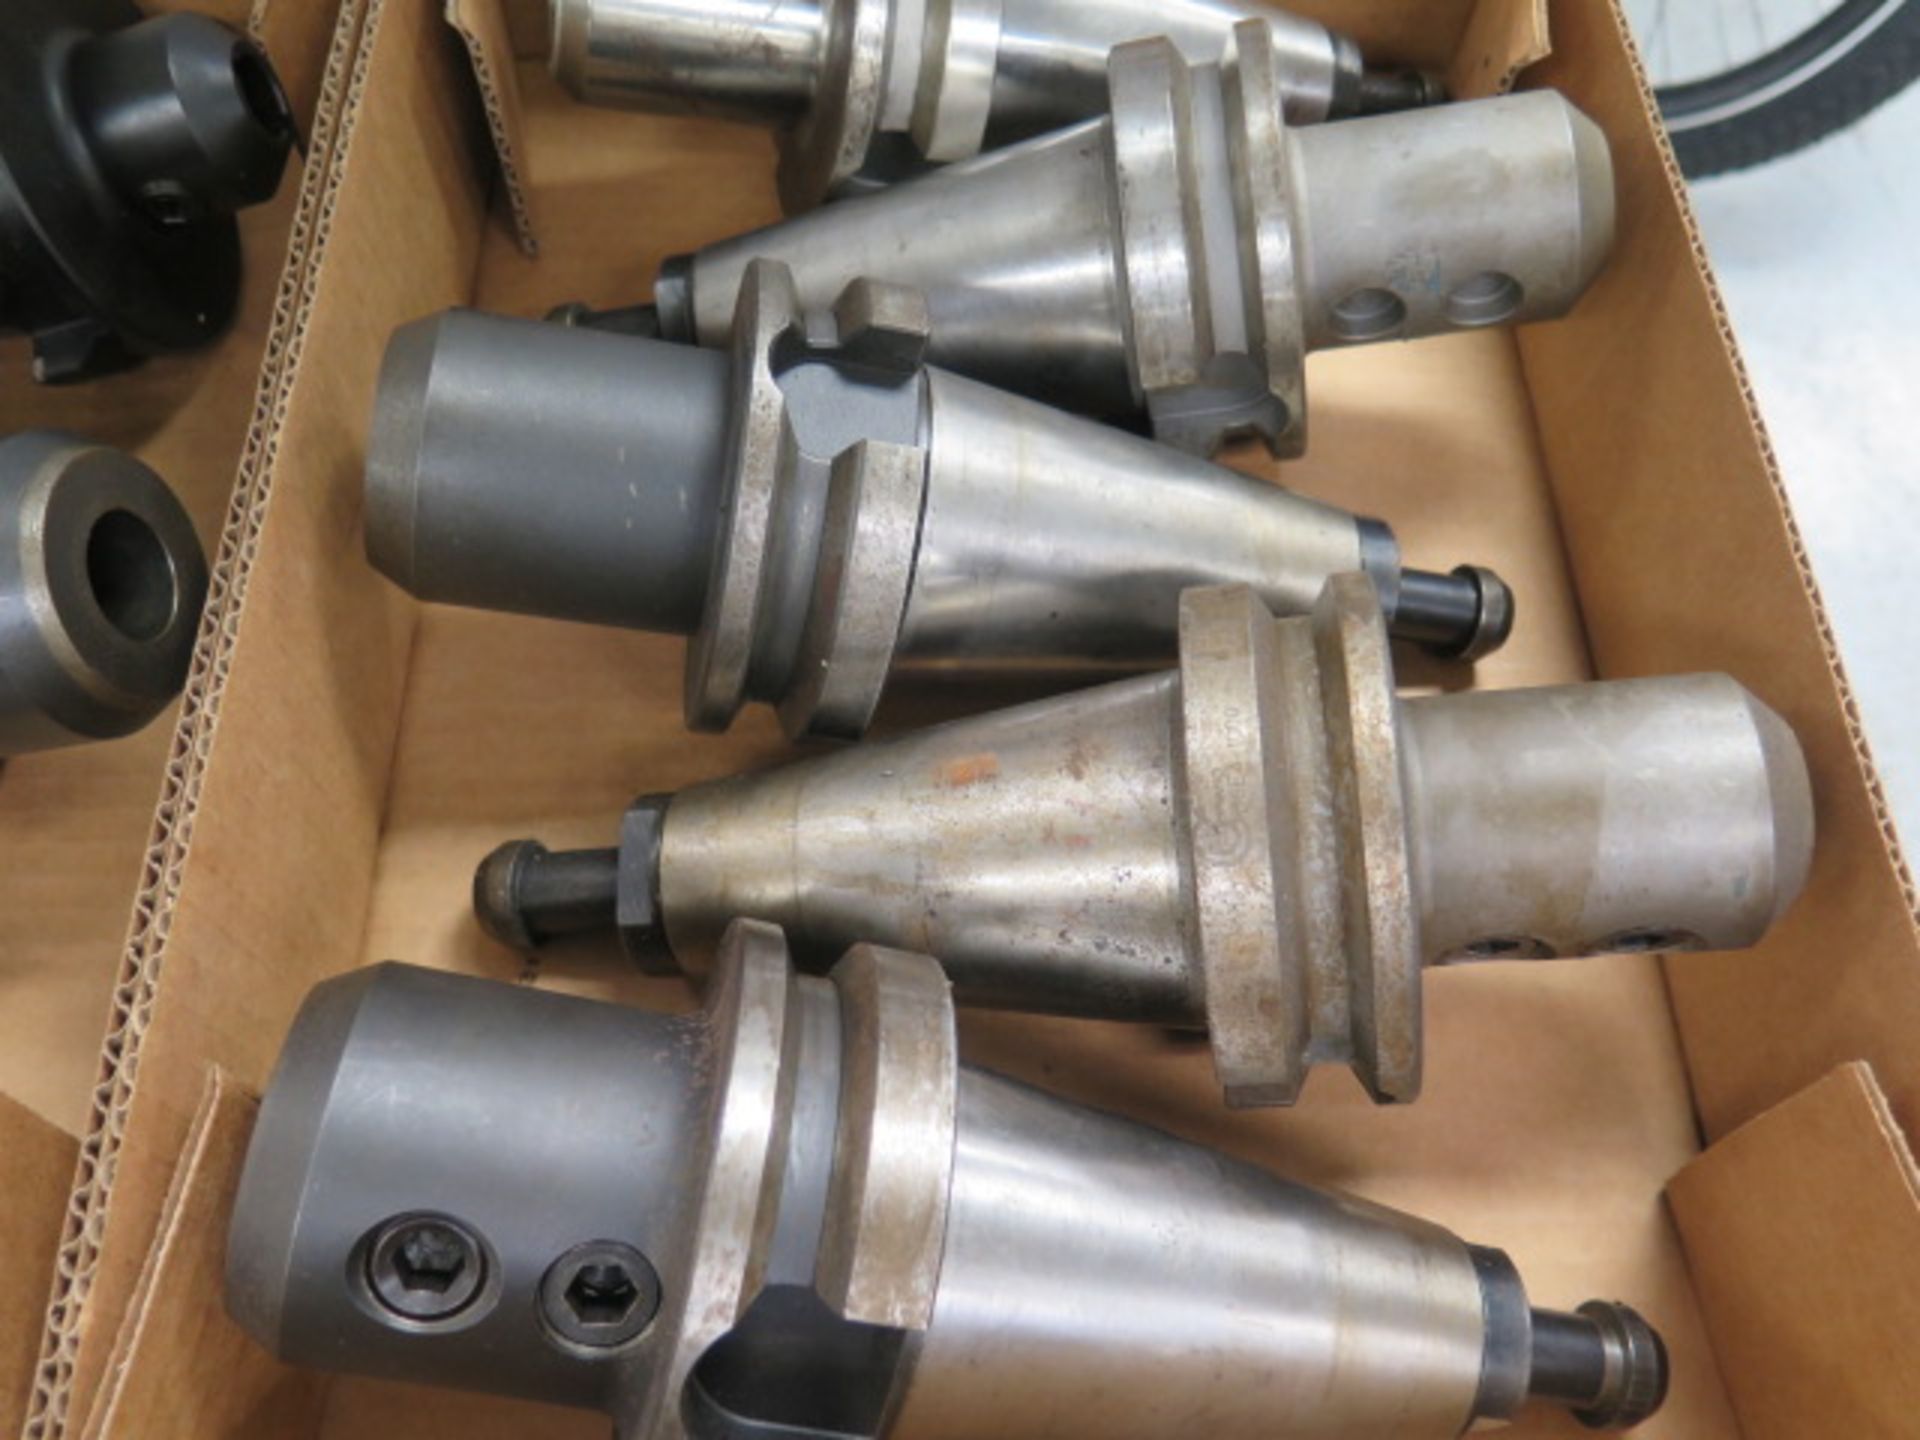 BT-50 Taper Tooling (5) (SOLD AS-IS - NO WARRANTY) (Located @ 2229 Ringwood Ave. San Jose) - Image 4 of 5